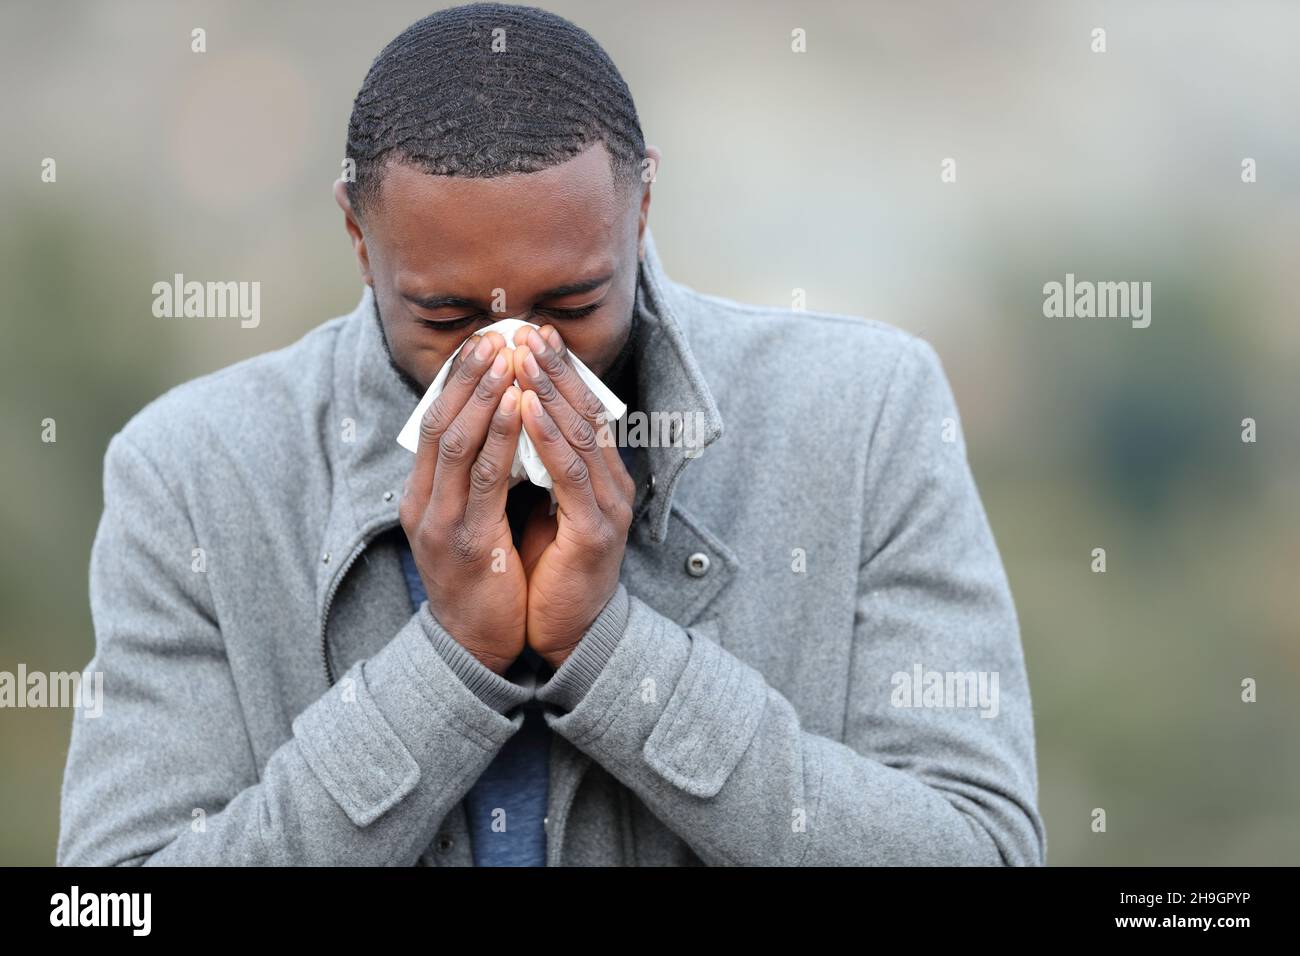 Ill man with black skin blowing on tissue outddors in winter Stock Photo